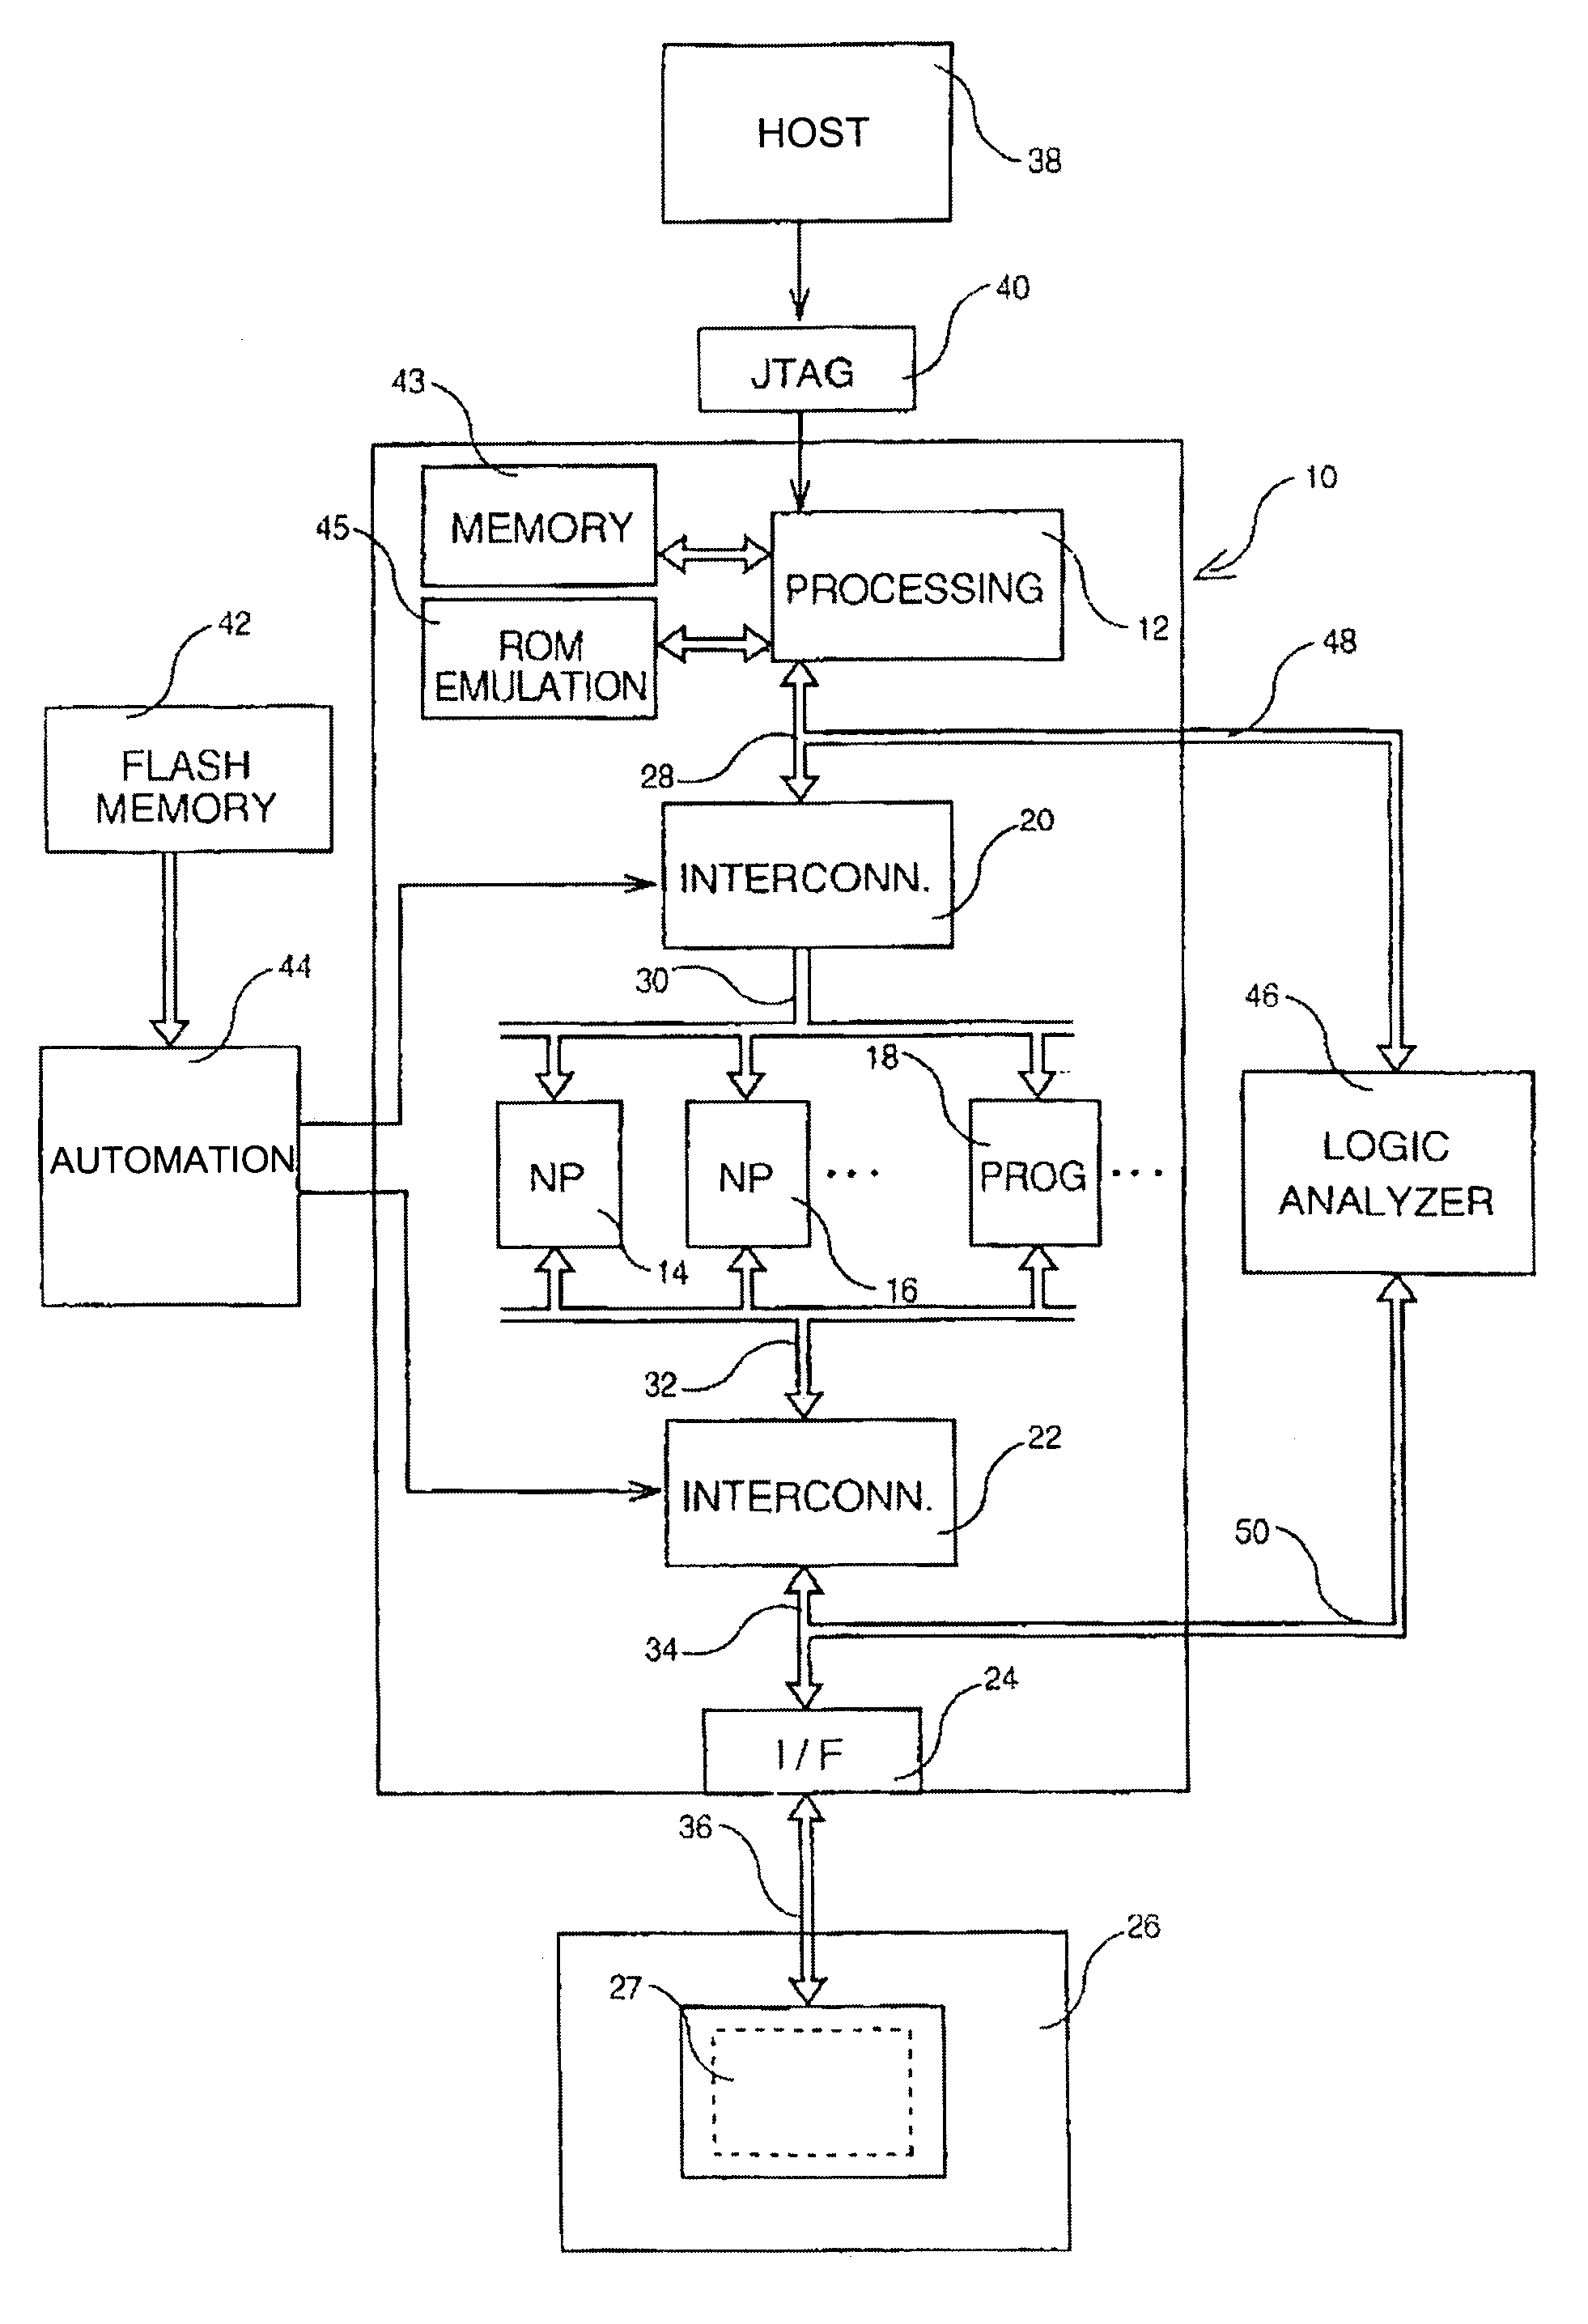 Functional replicator of a specific integrated circuit and its use as an emulation device